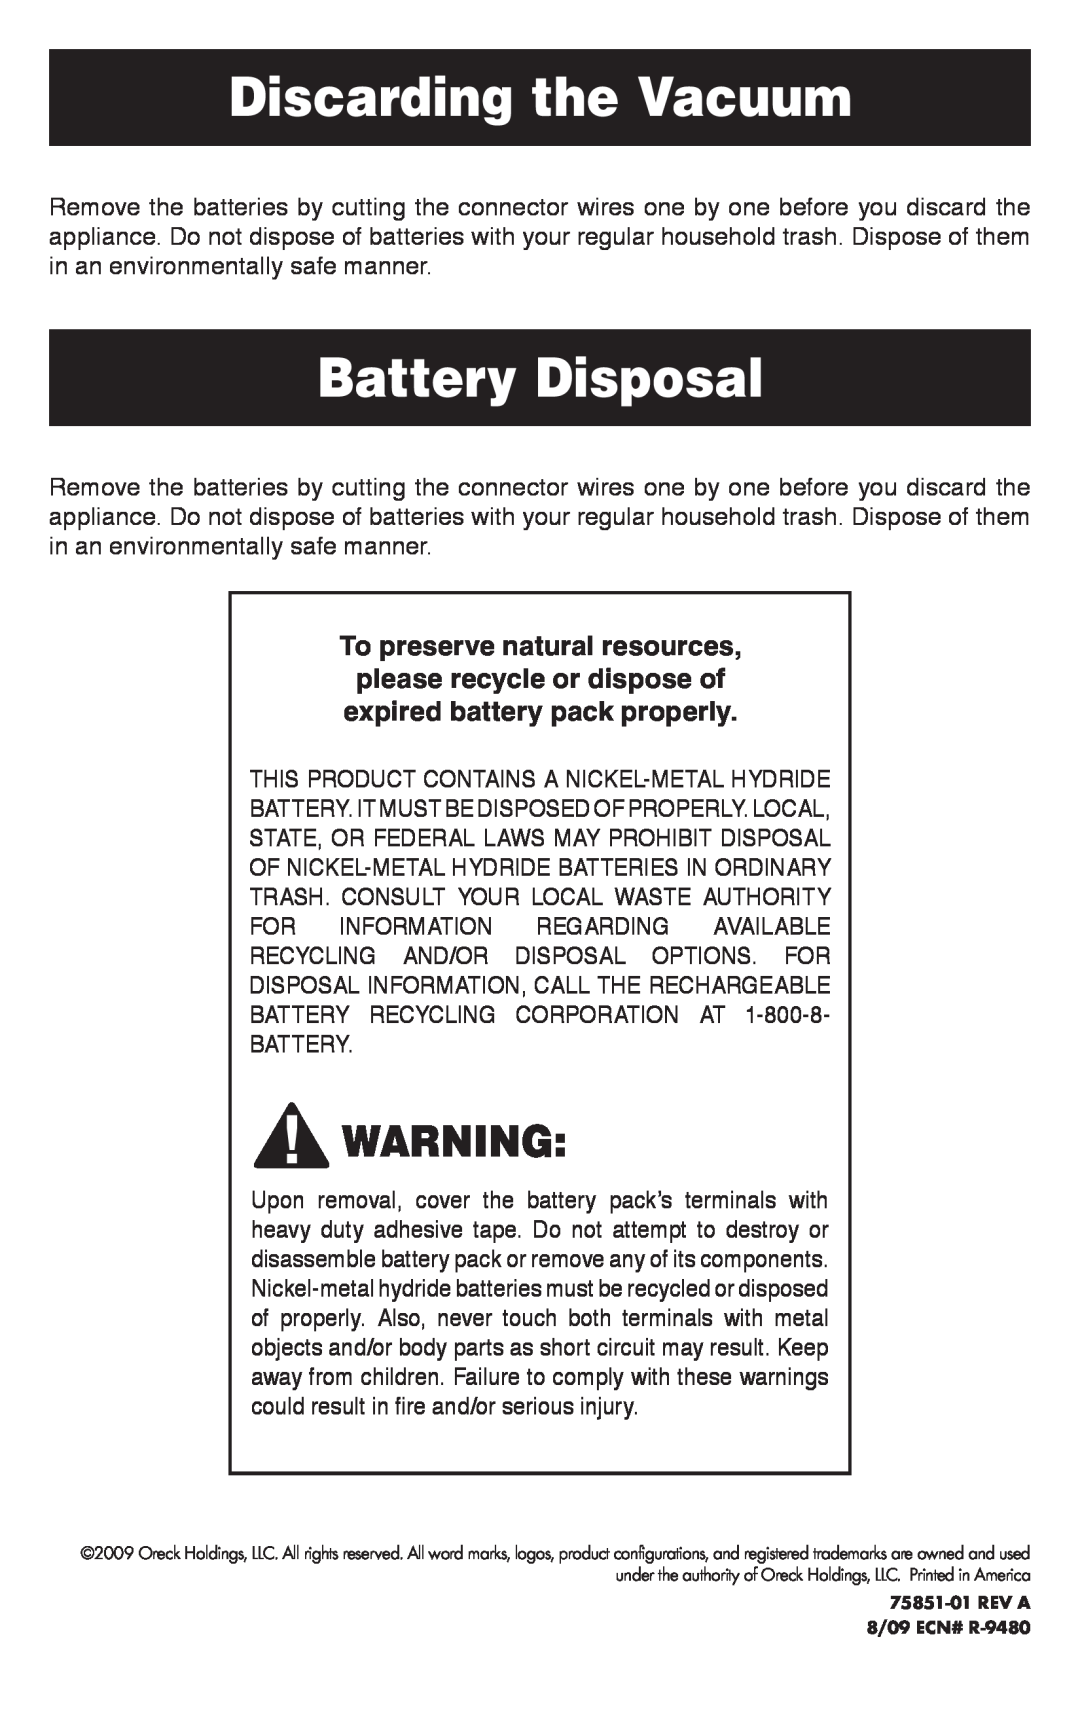 Oreck TEK 100 important safety instructions Discarding the Vacuum, Battery Disposal 